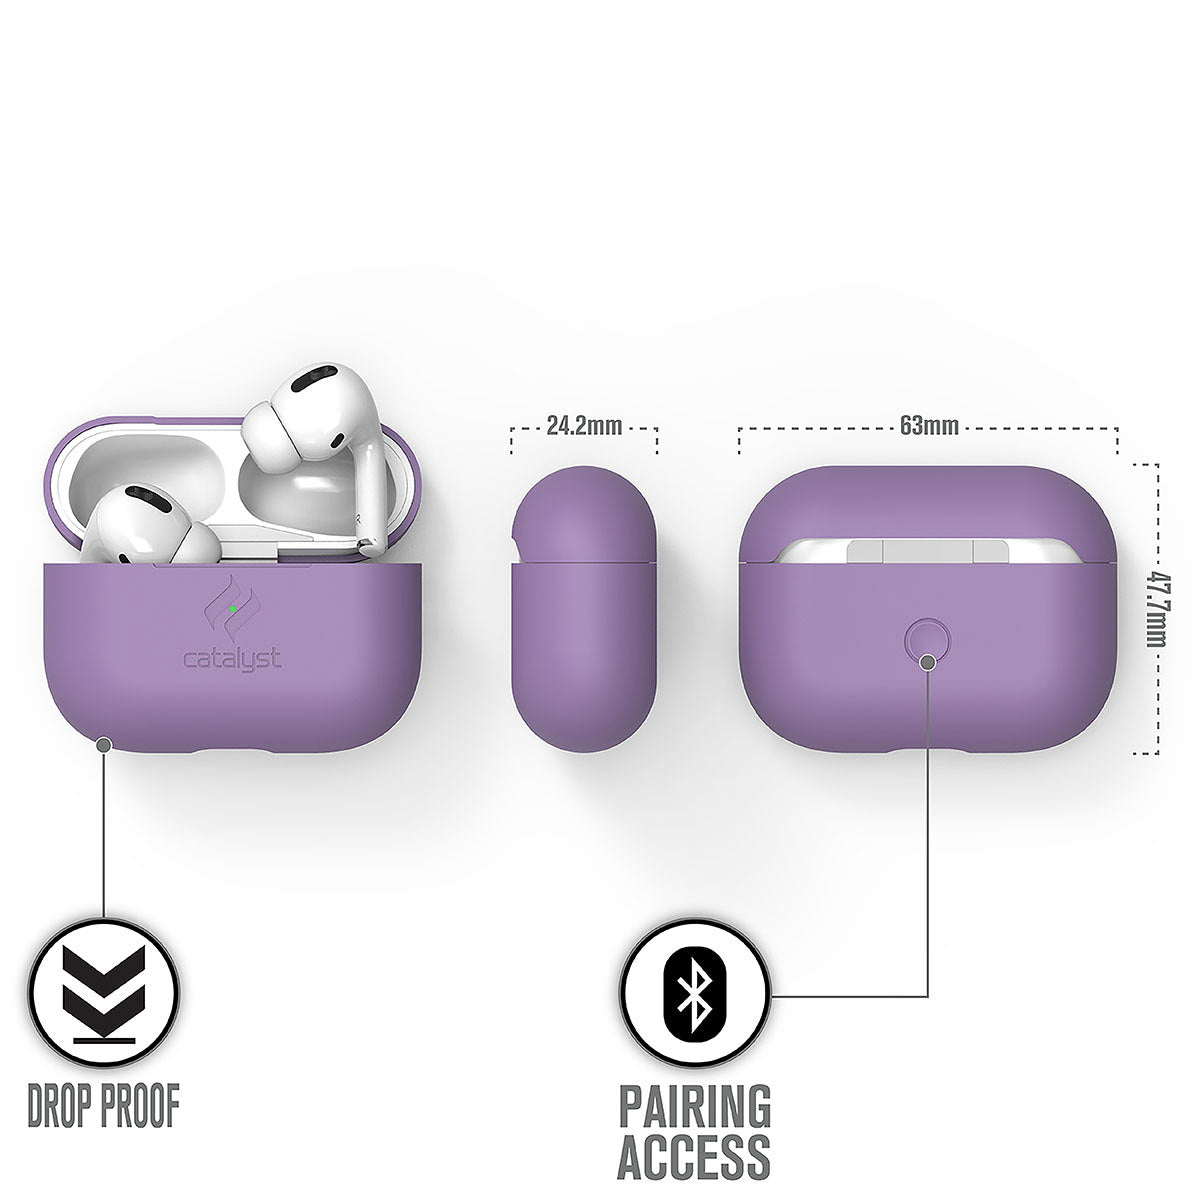 Catalyst airpods pro gen 2/1 slim case showing the case dimensions  in a lilac colorway text reads drop proof pairing access